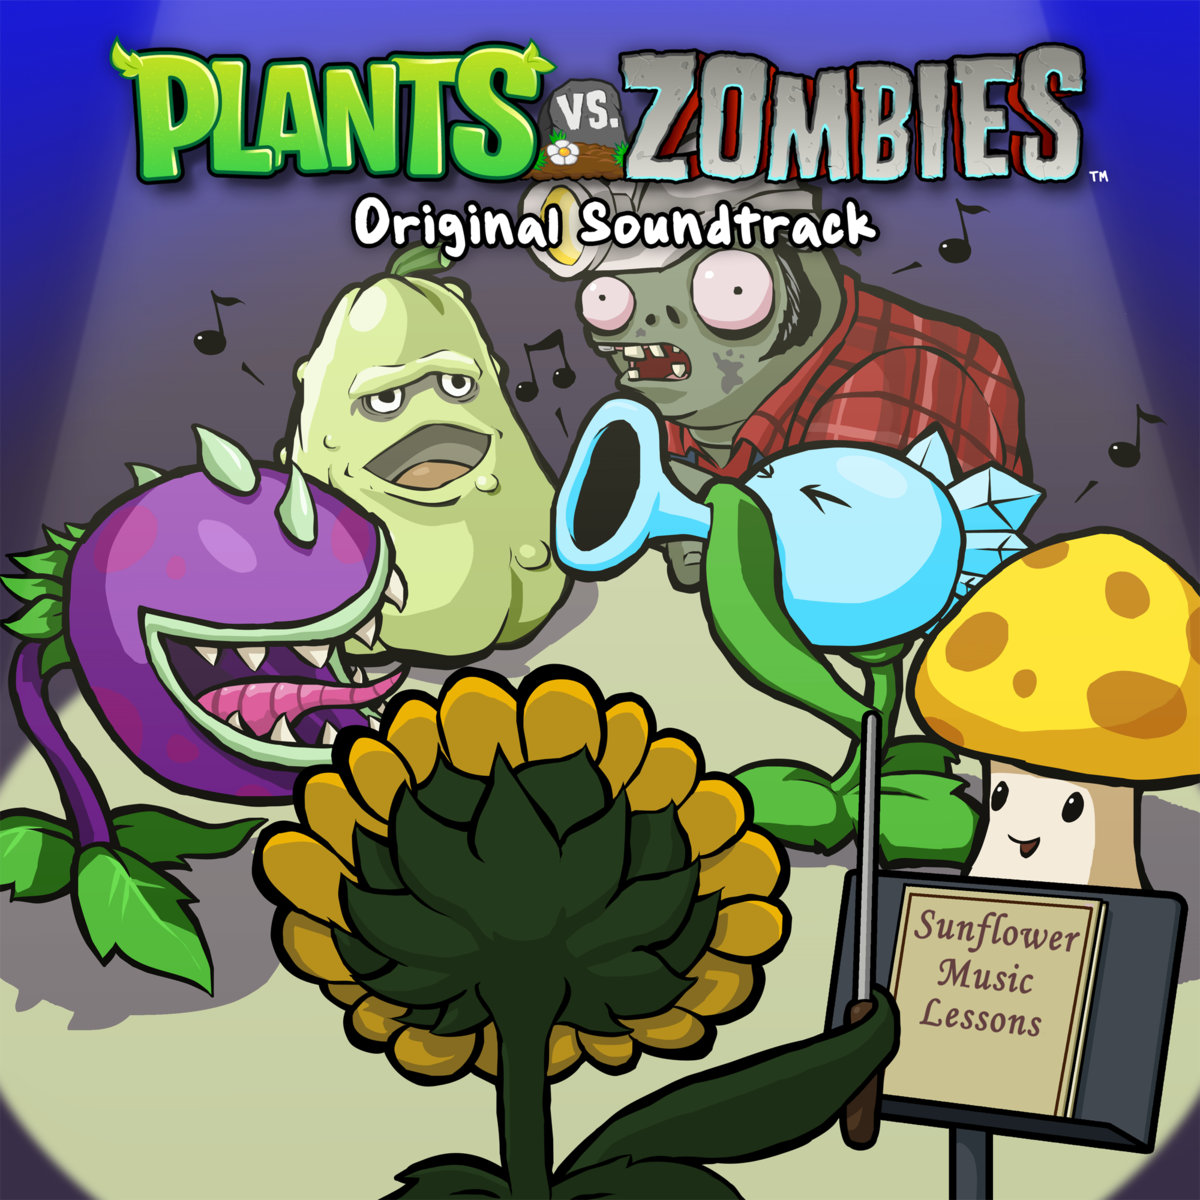 plants vs zombies 2 free download full version for pc game